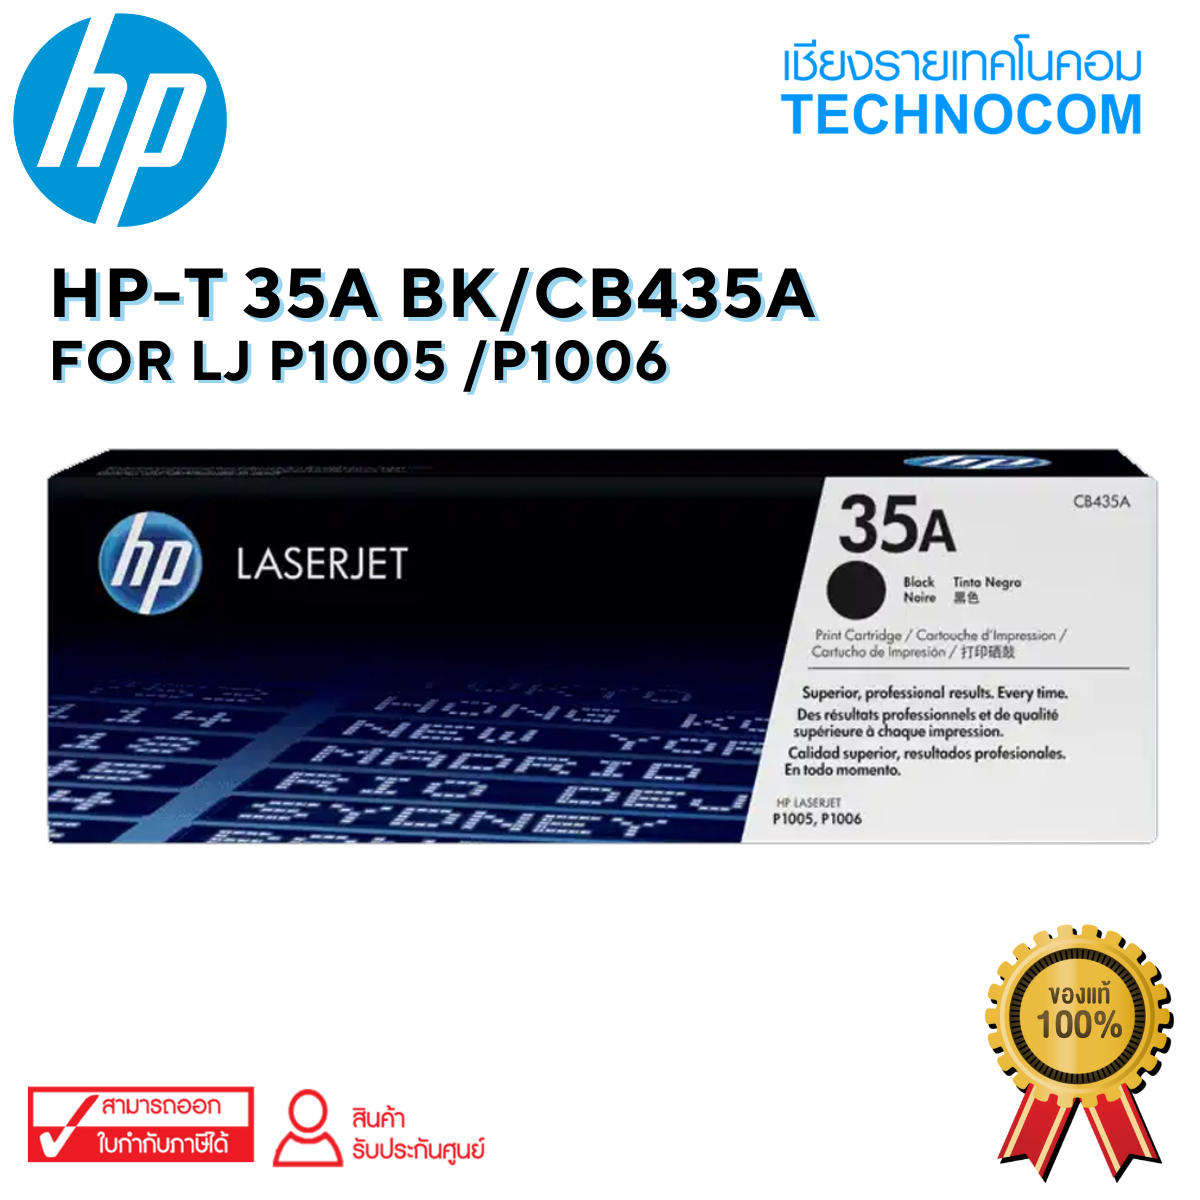 HP-T 35A BK/CB435A For LJ P1005 /P1006